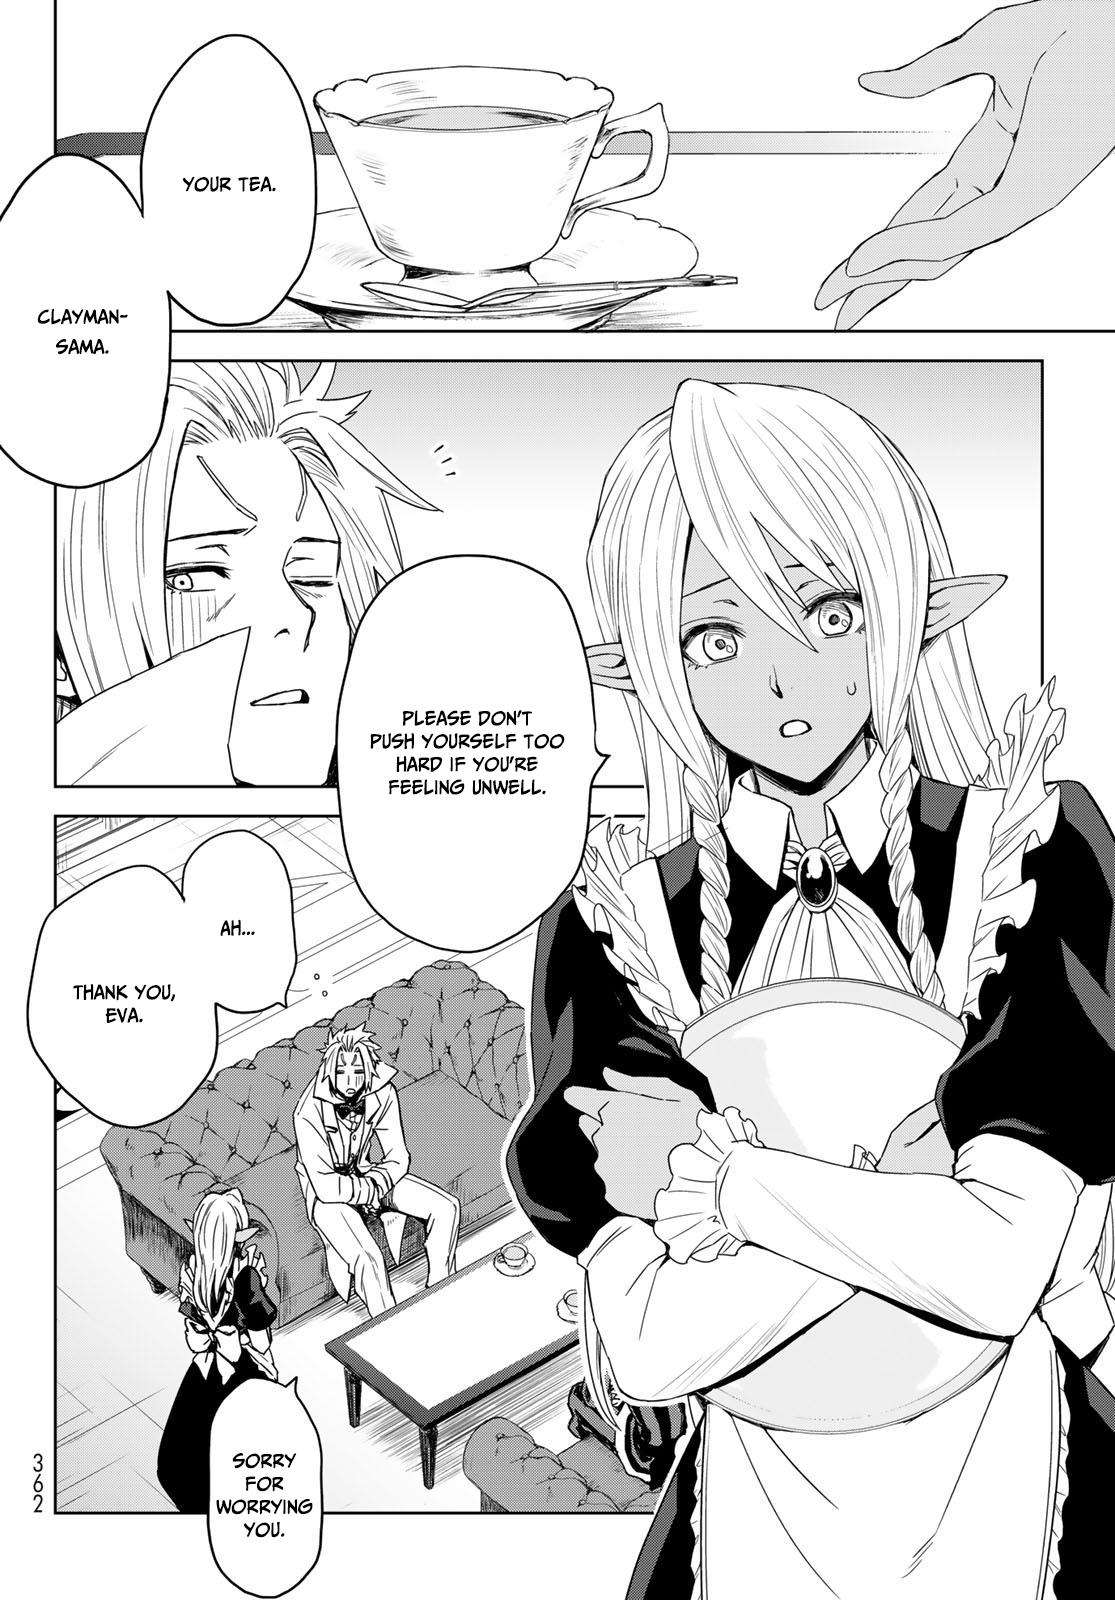 That Time I Got Reincarnated as a Slime - Clayman - chapter 2 - #4